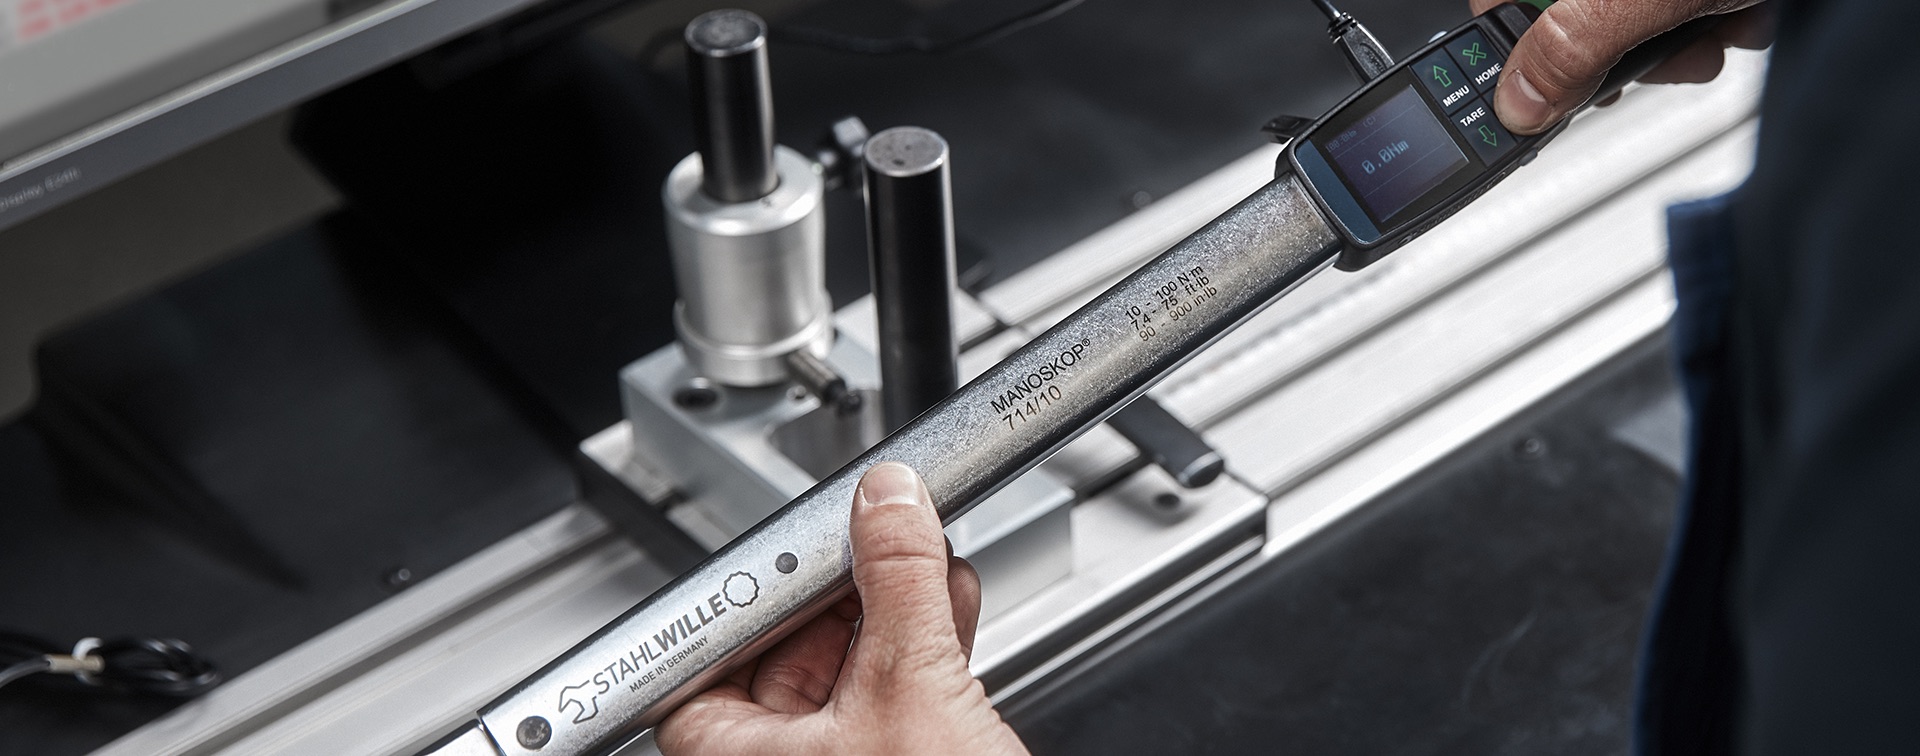 A torque wrench from STAHLWILLE is calibrated